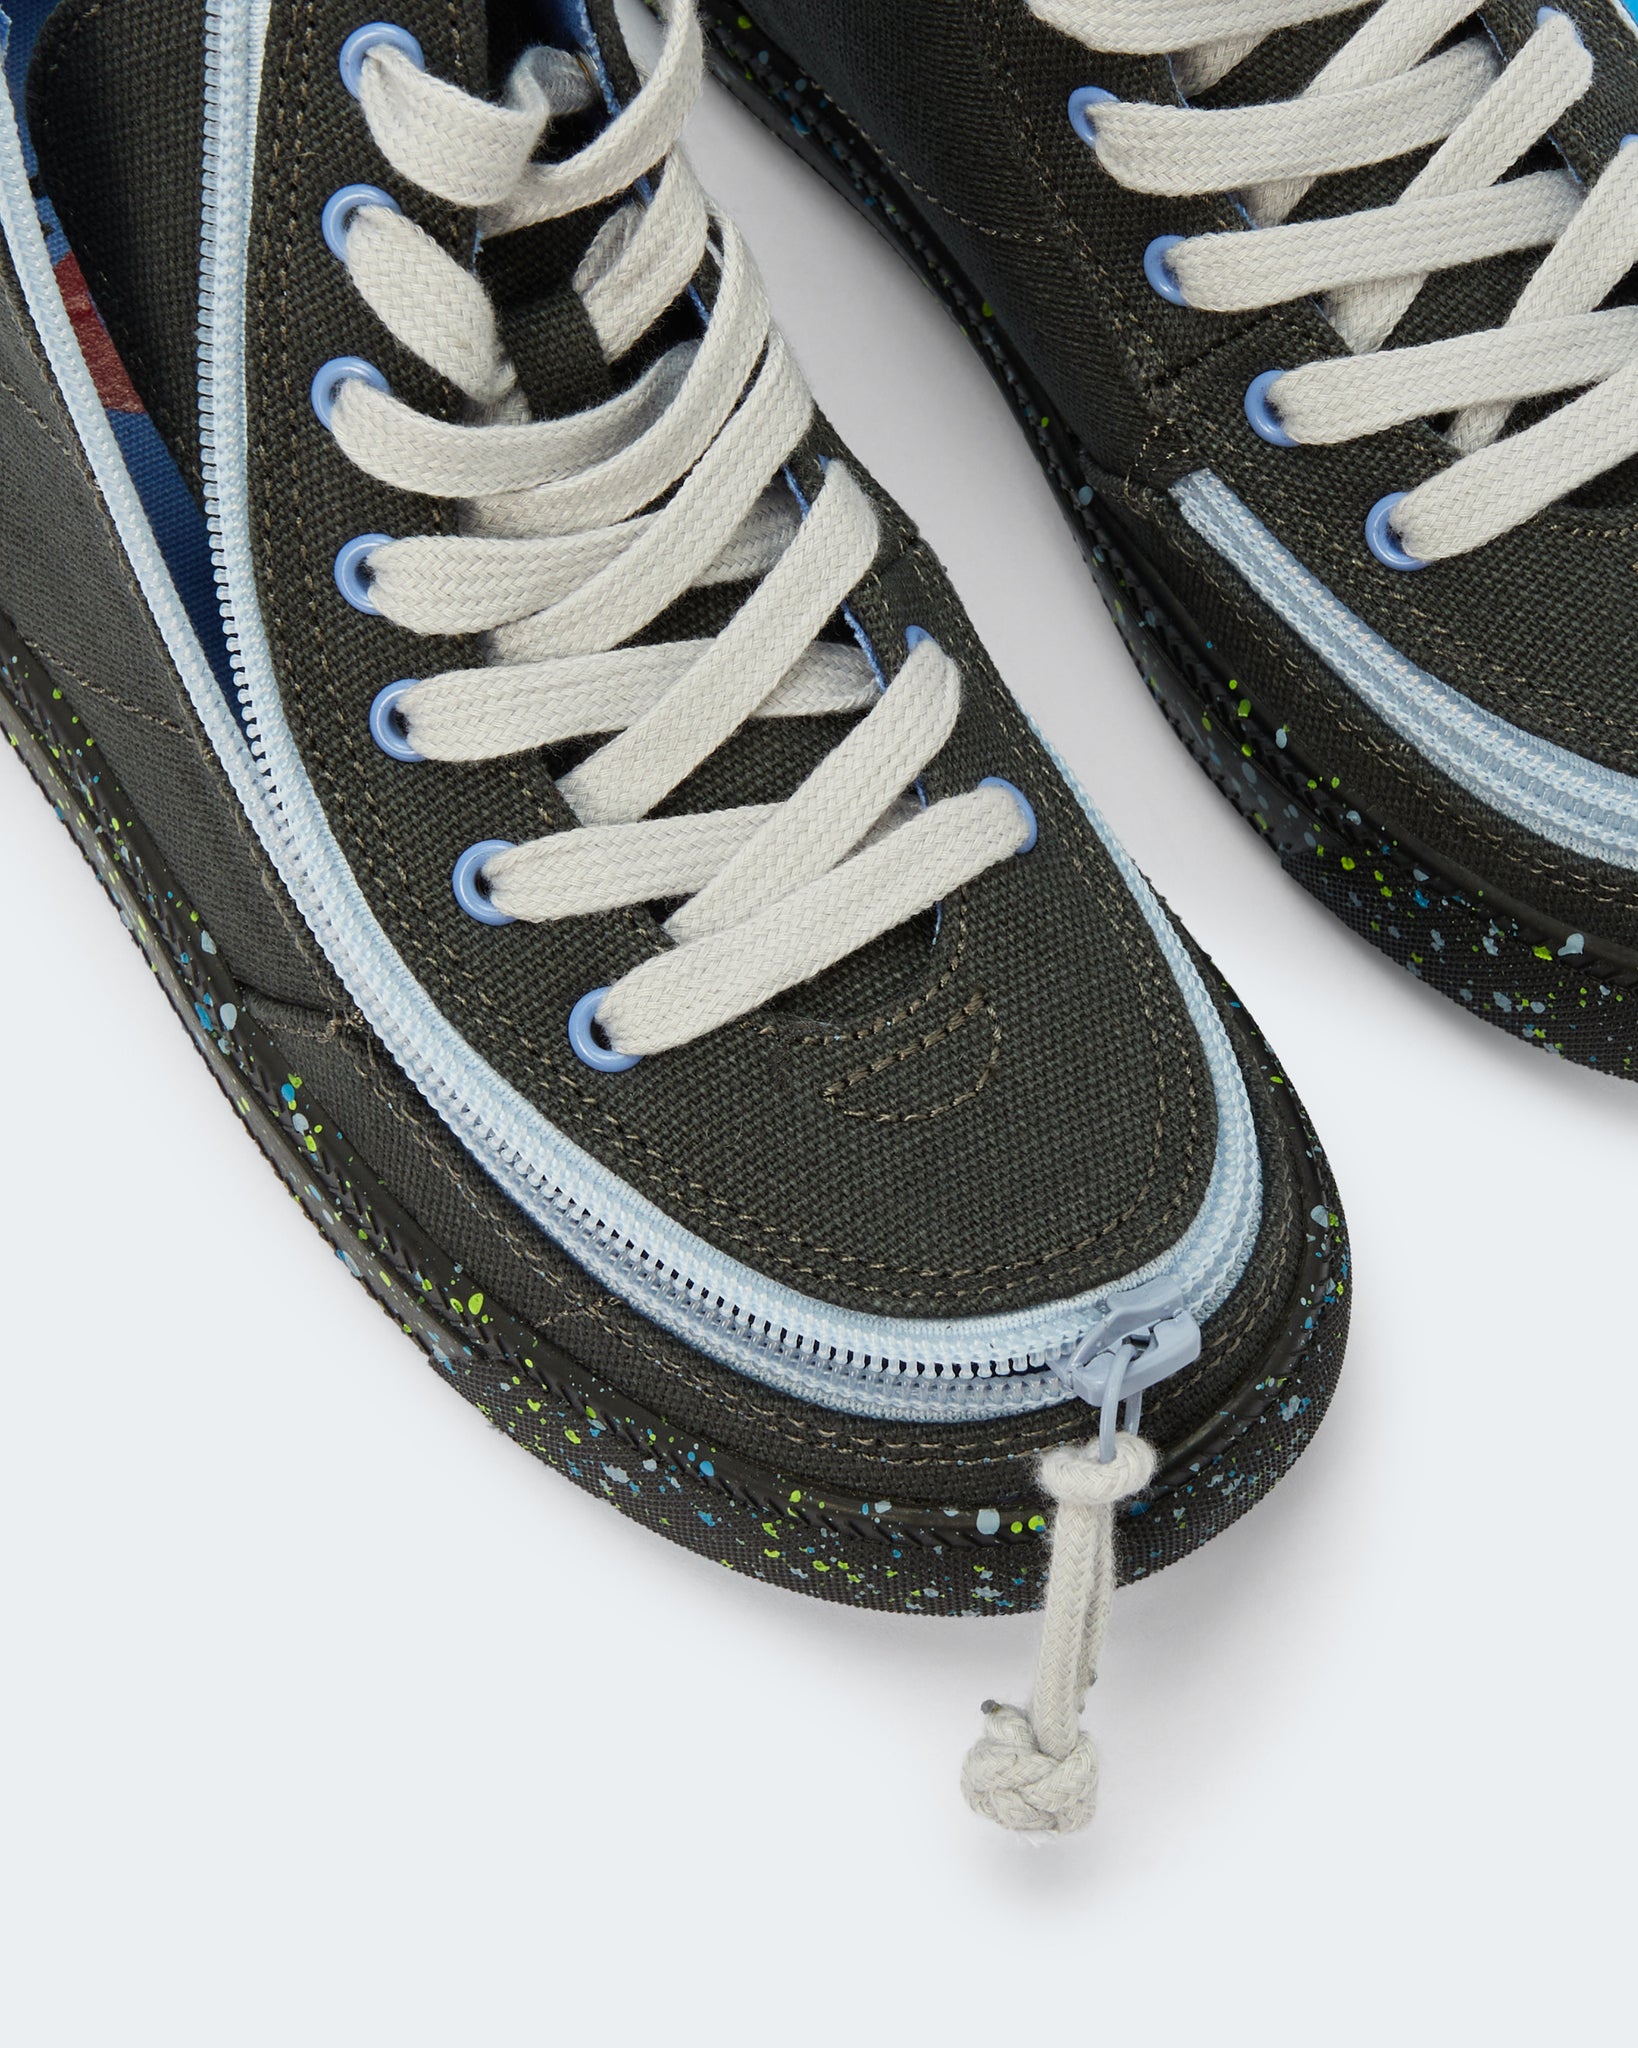 Classic High Top (Kids) - Charcoal/Blue Speckle